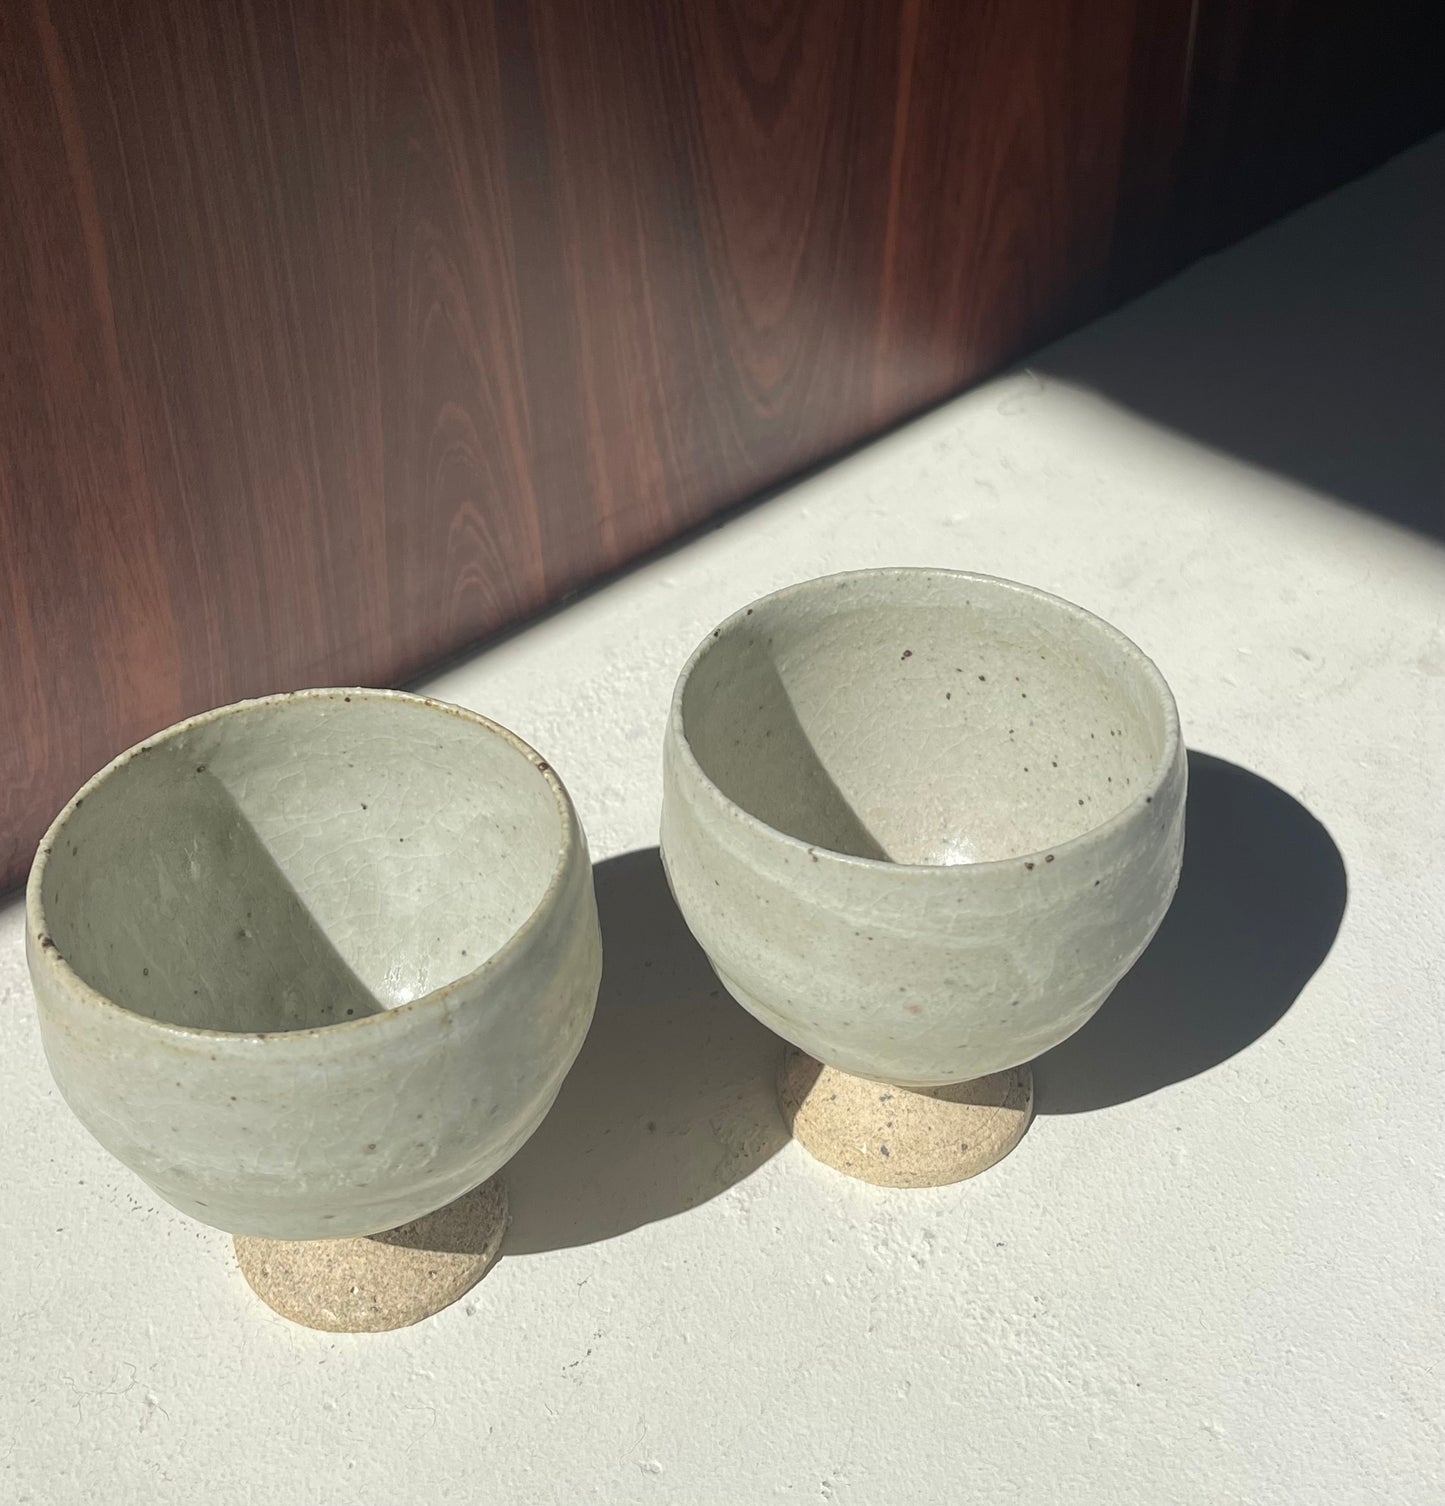 CERAMIC JAPANESE TWIN CUPS